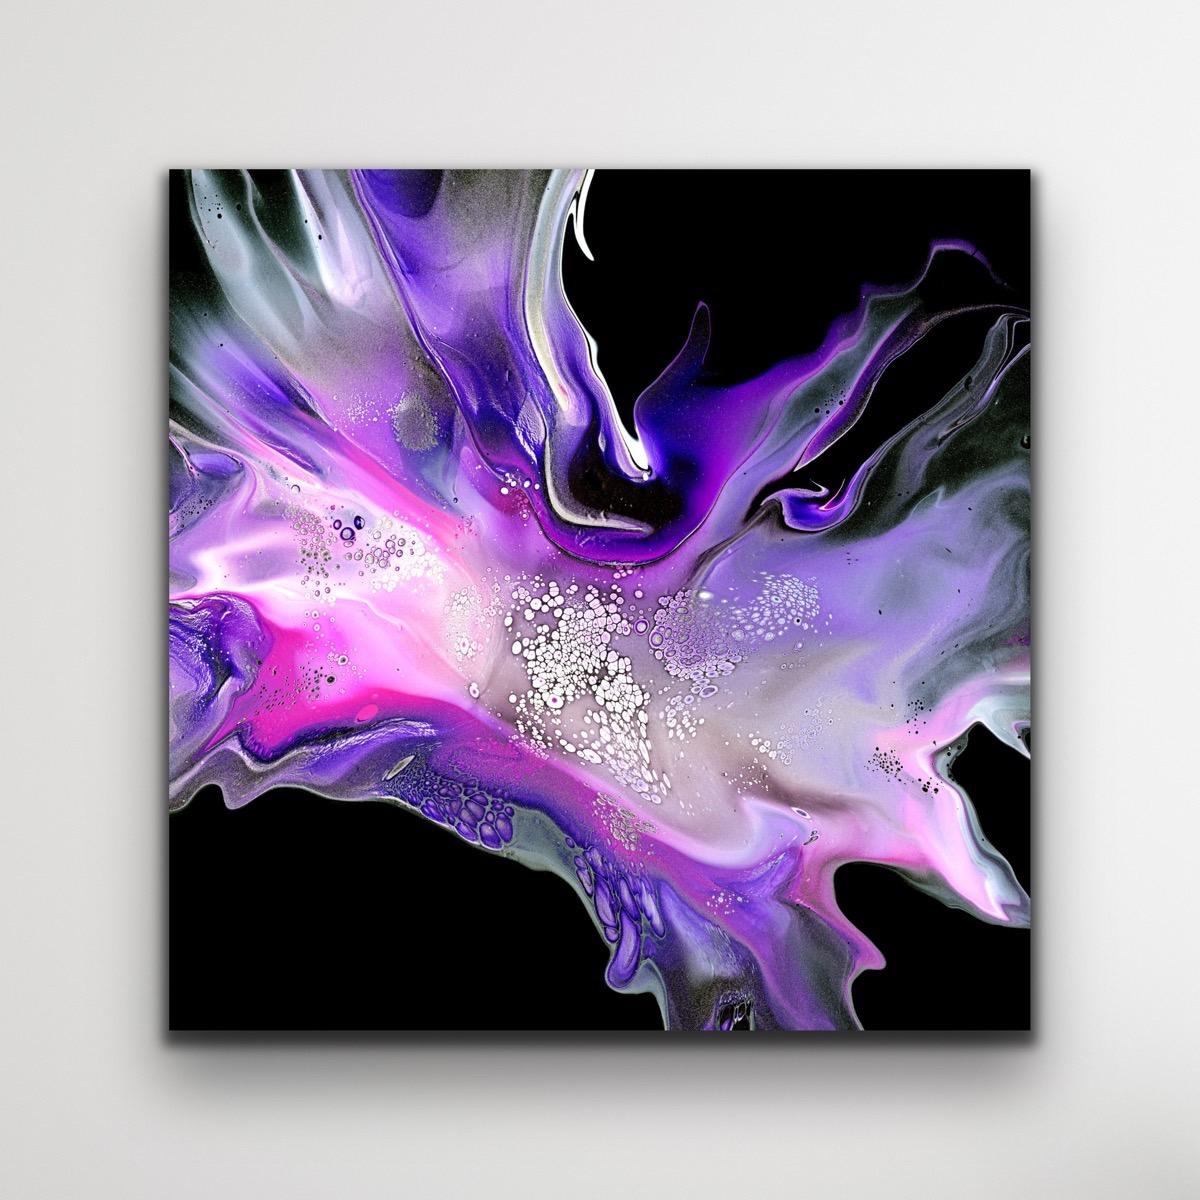 Black Purple Abstract Modern Large Giclee Print Art, Limited Edition Signed